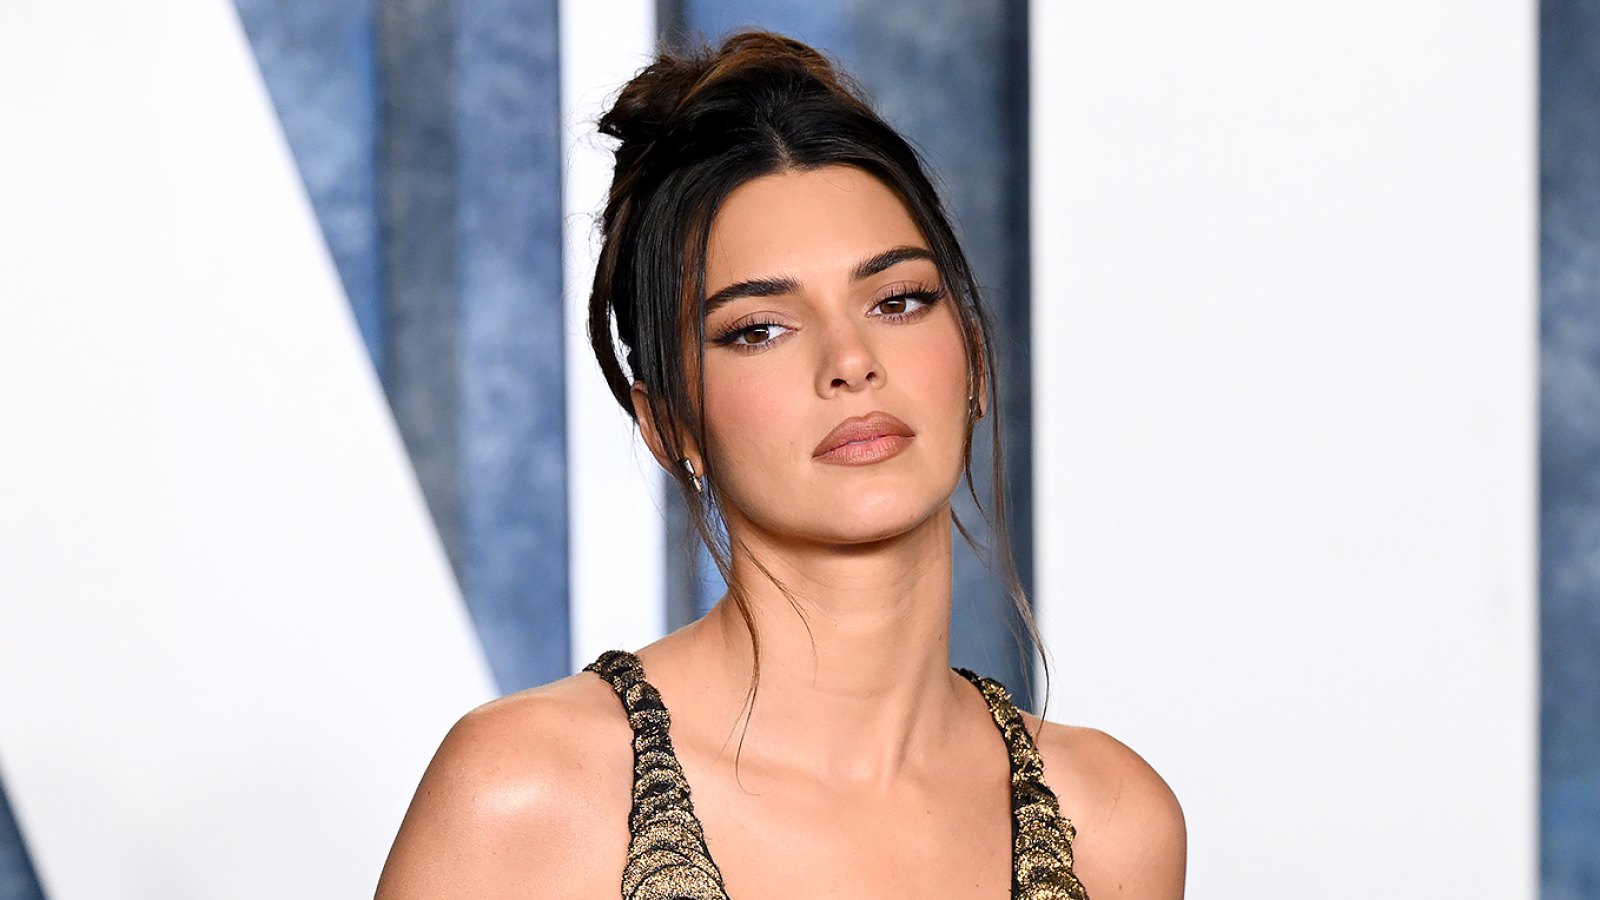 Why Kendall Jenner Won't Be Launching a Beauty Brand